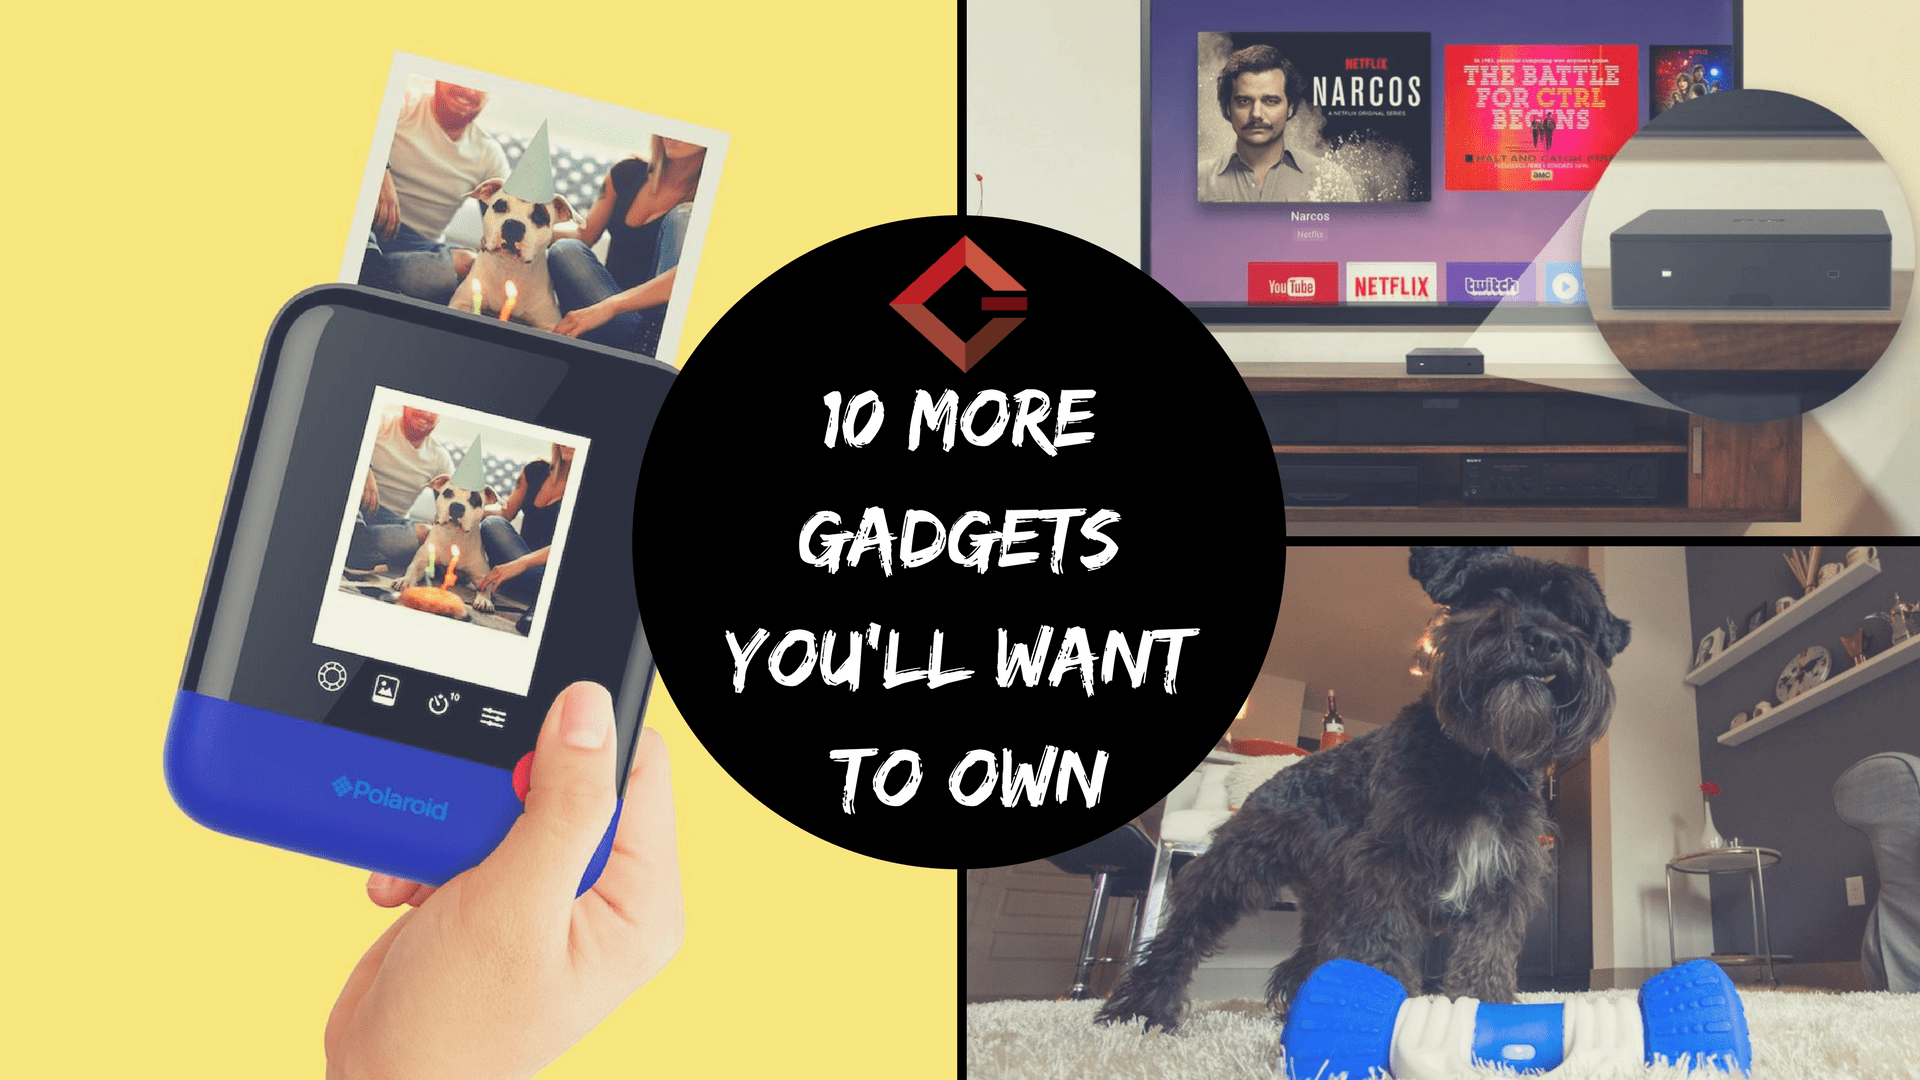 10 ‘More’ Gadgets That You’ll Want To Own